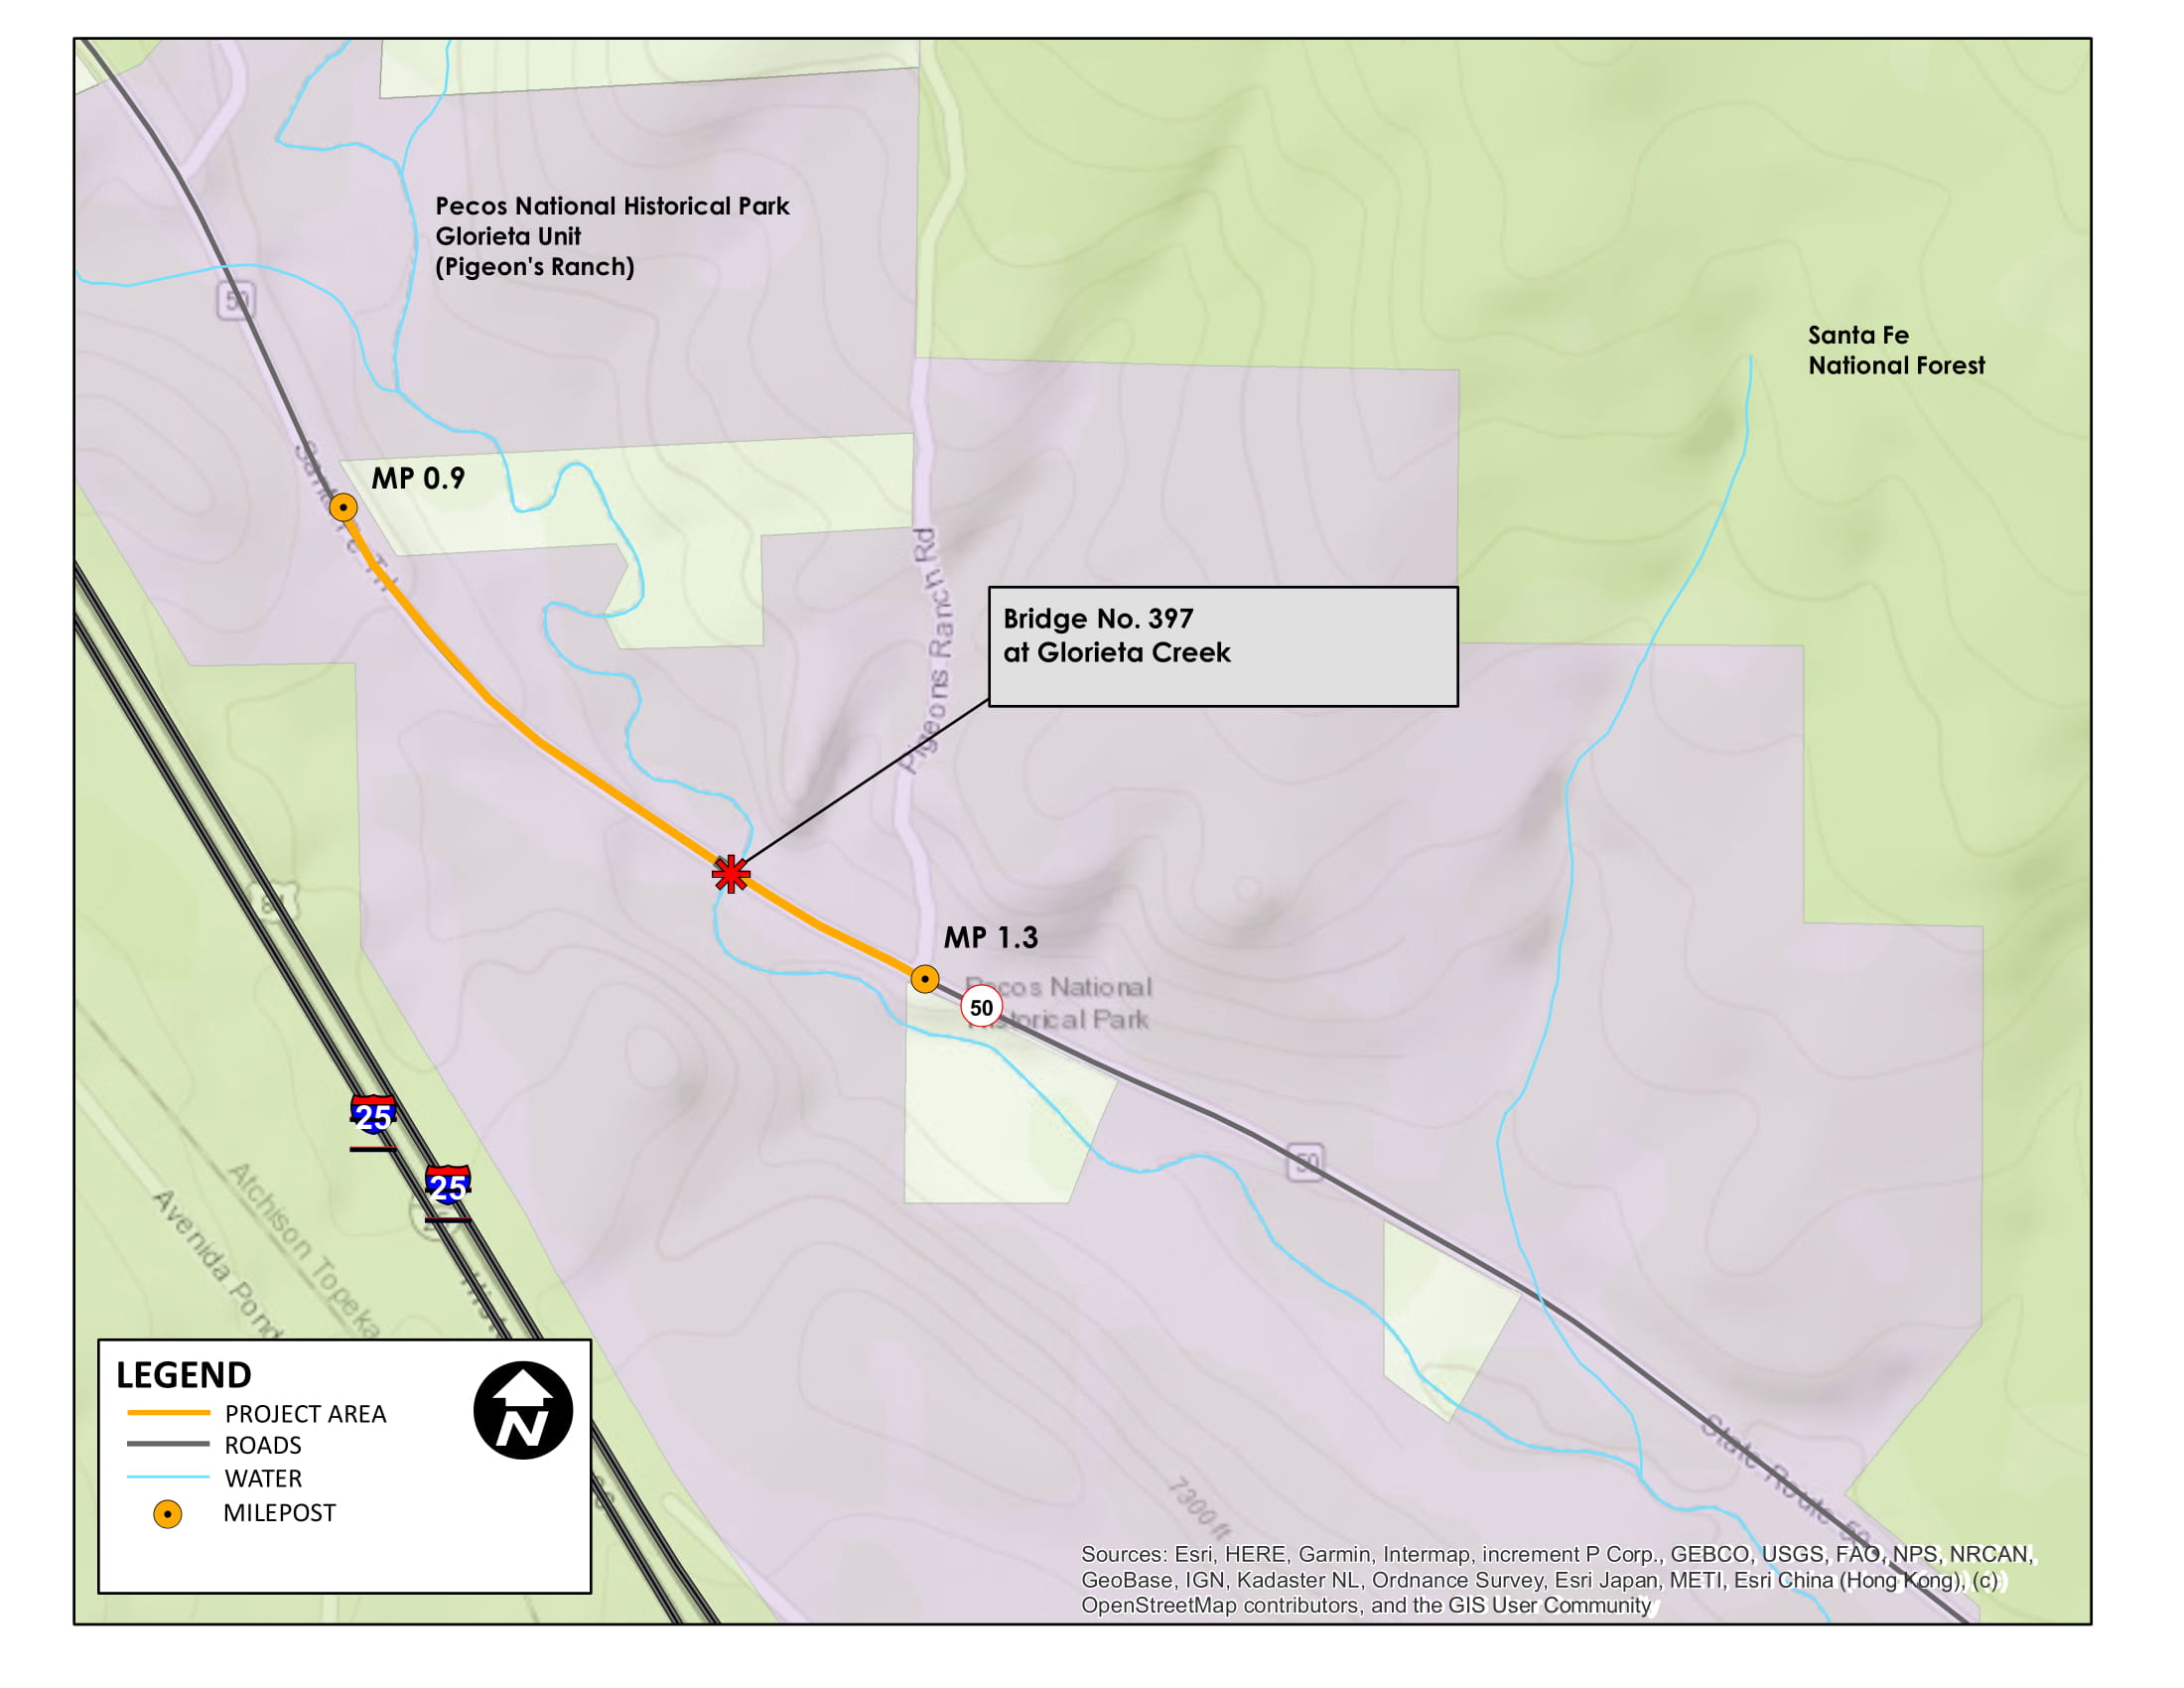 The NMDOT, in cooperation with FHWA, is proposing to replace Bridge No. 397 located at Milepost 1.15 on N.M. Highway 50 east of Glorieta Pass, in Santa Fe County, NM.